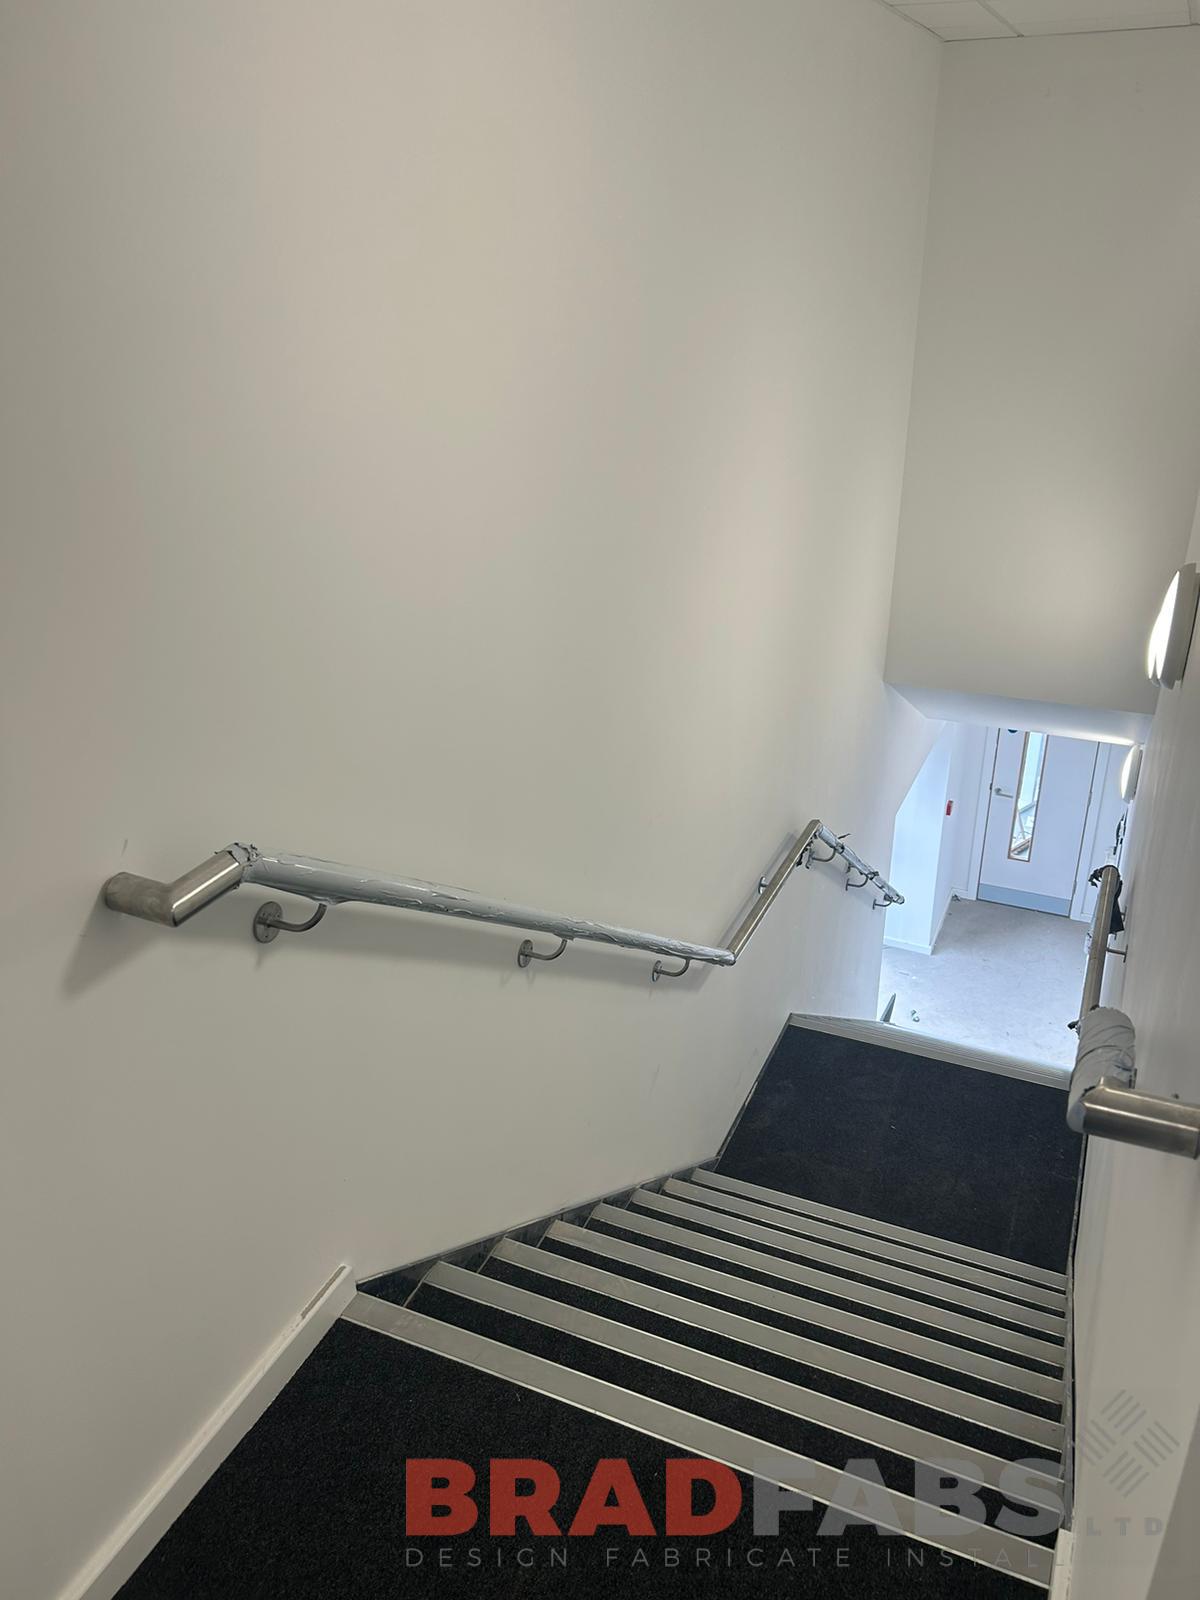 Bradfabs staircase, internal staircase, stainless steel handrails 